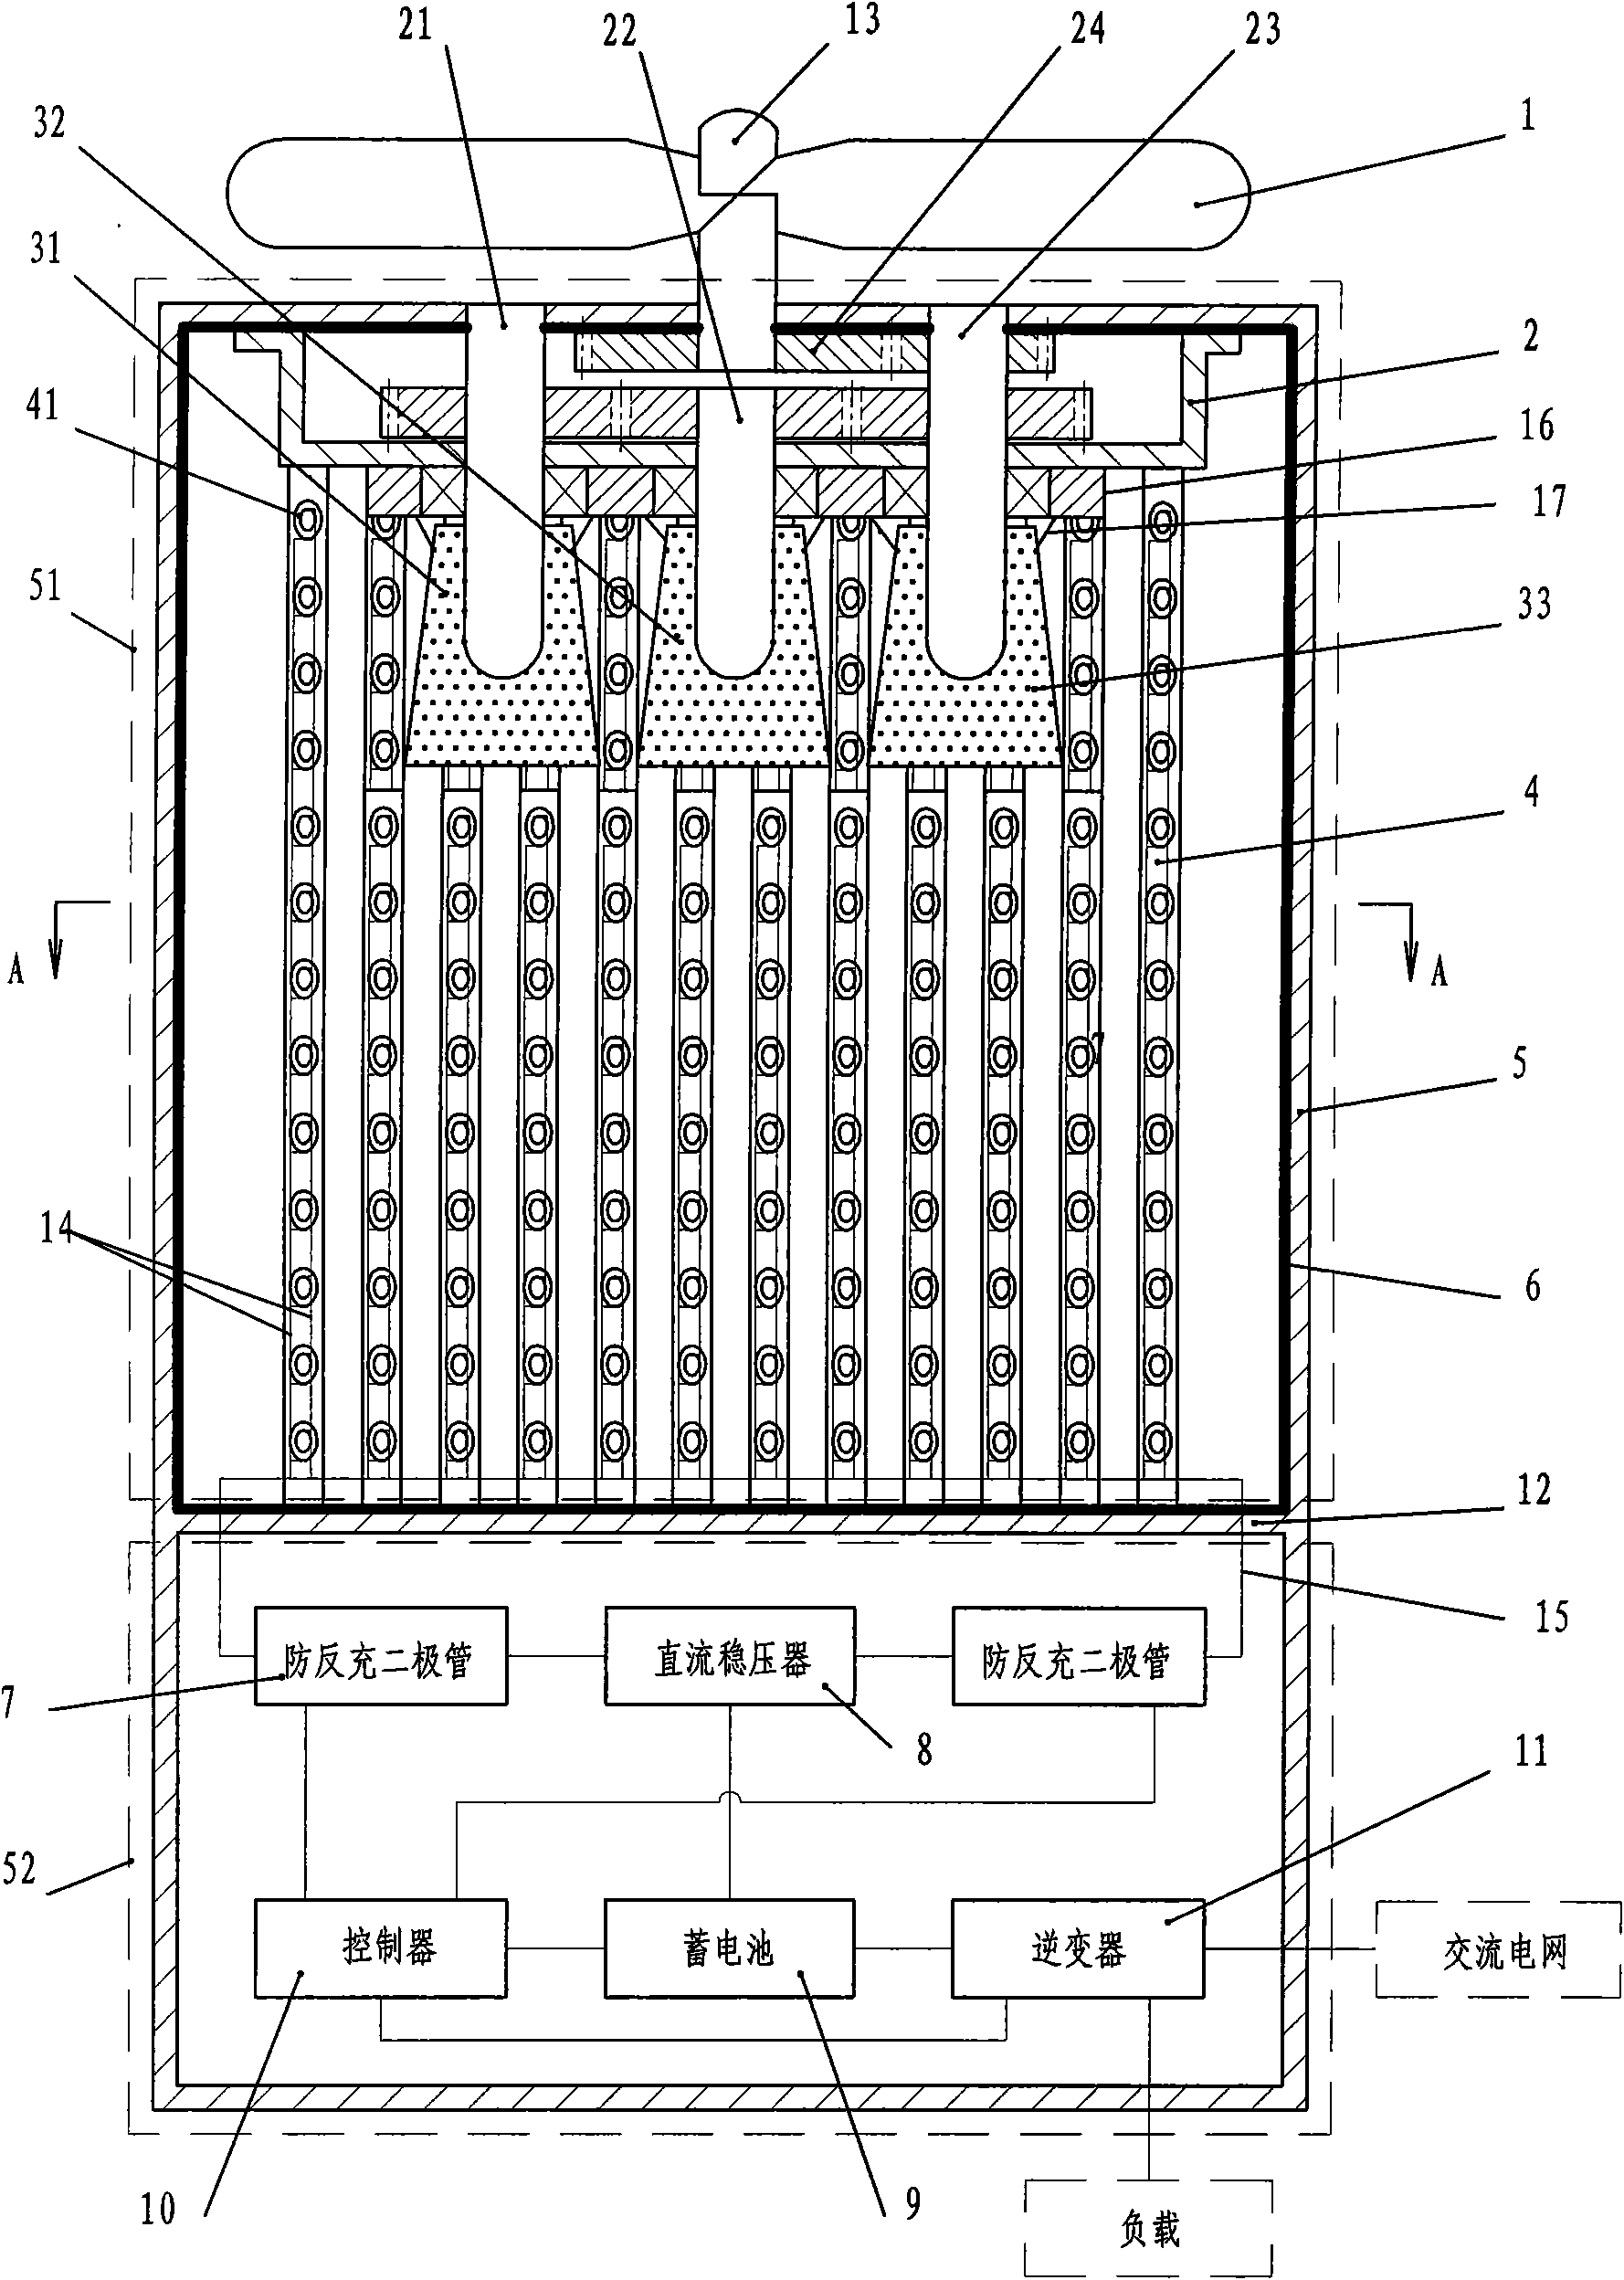 System for driving piezoelectric material to generate electricity by using wind energy